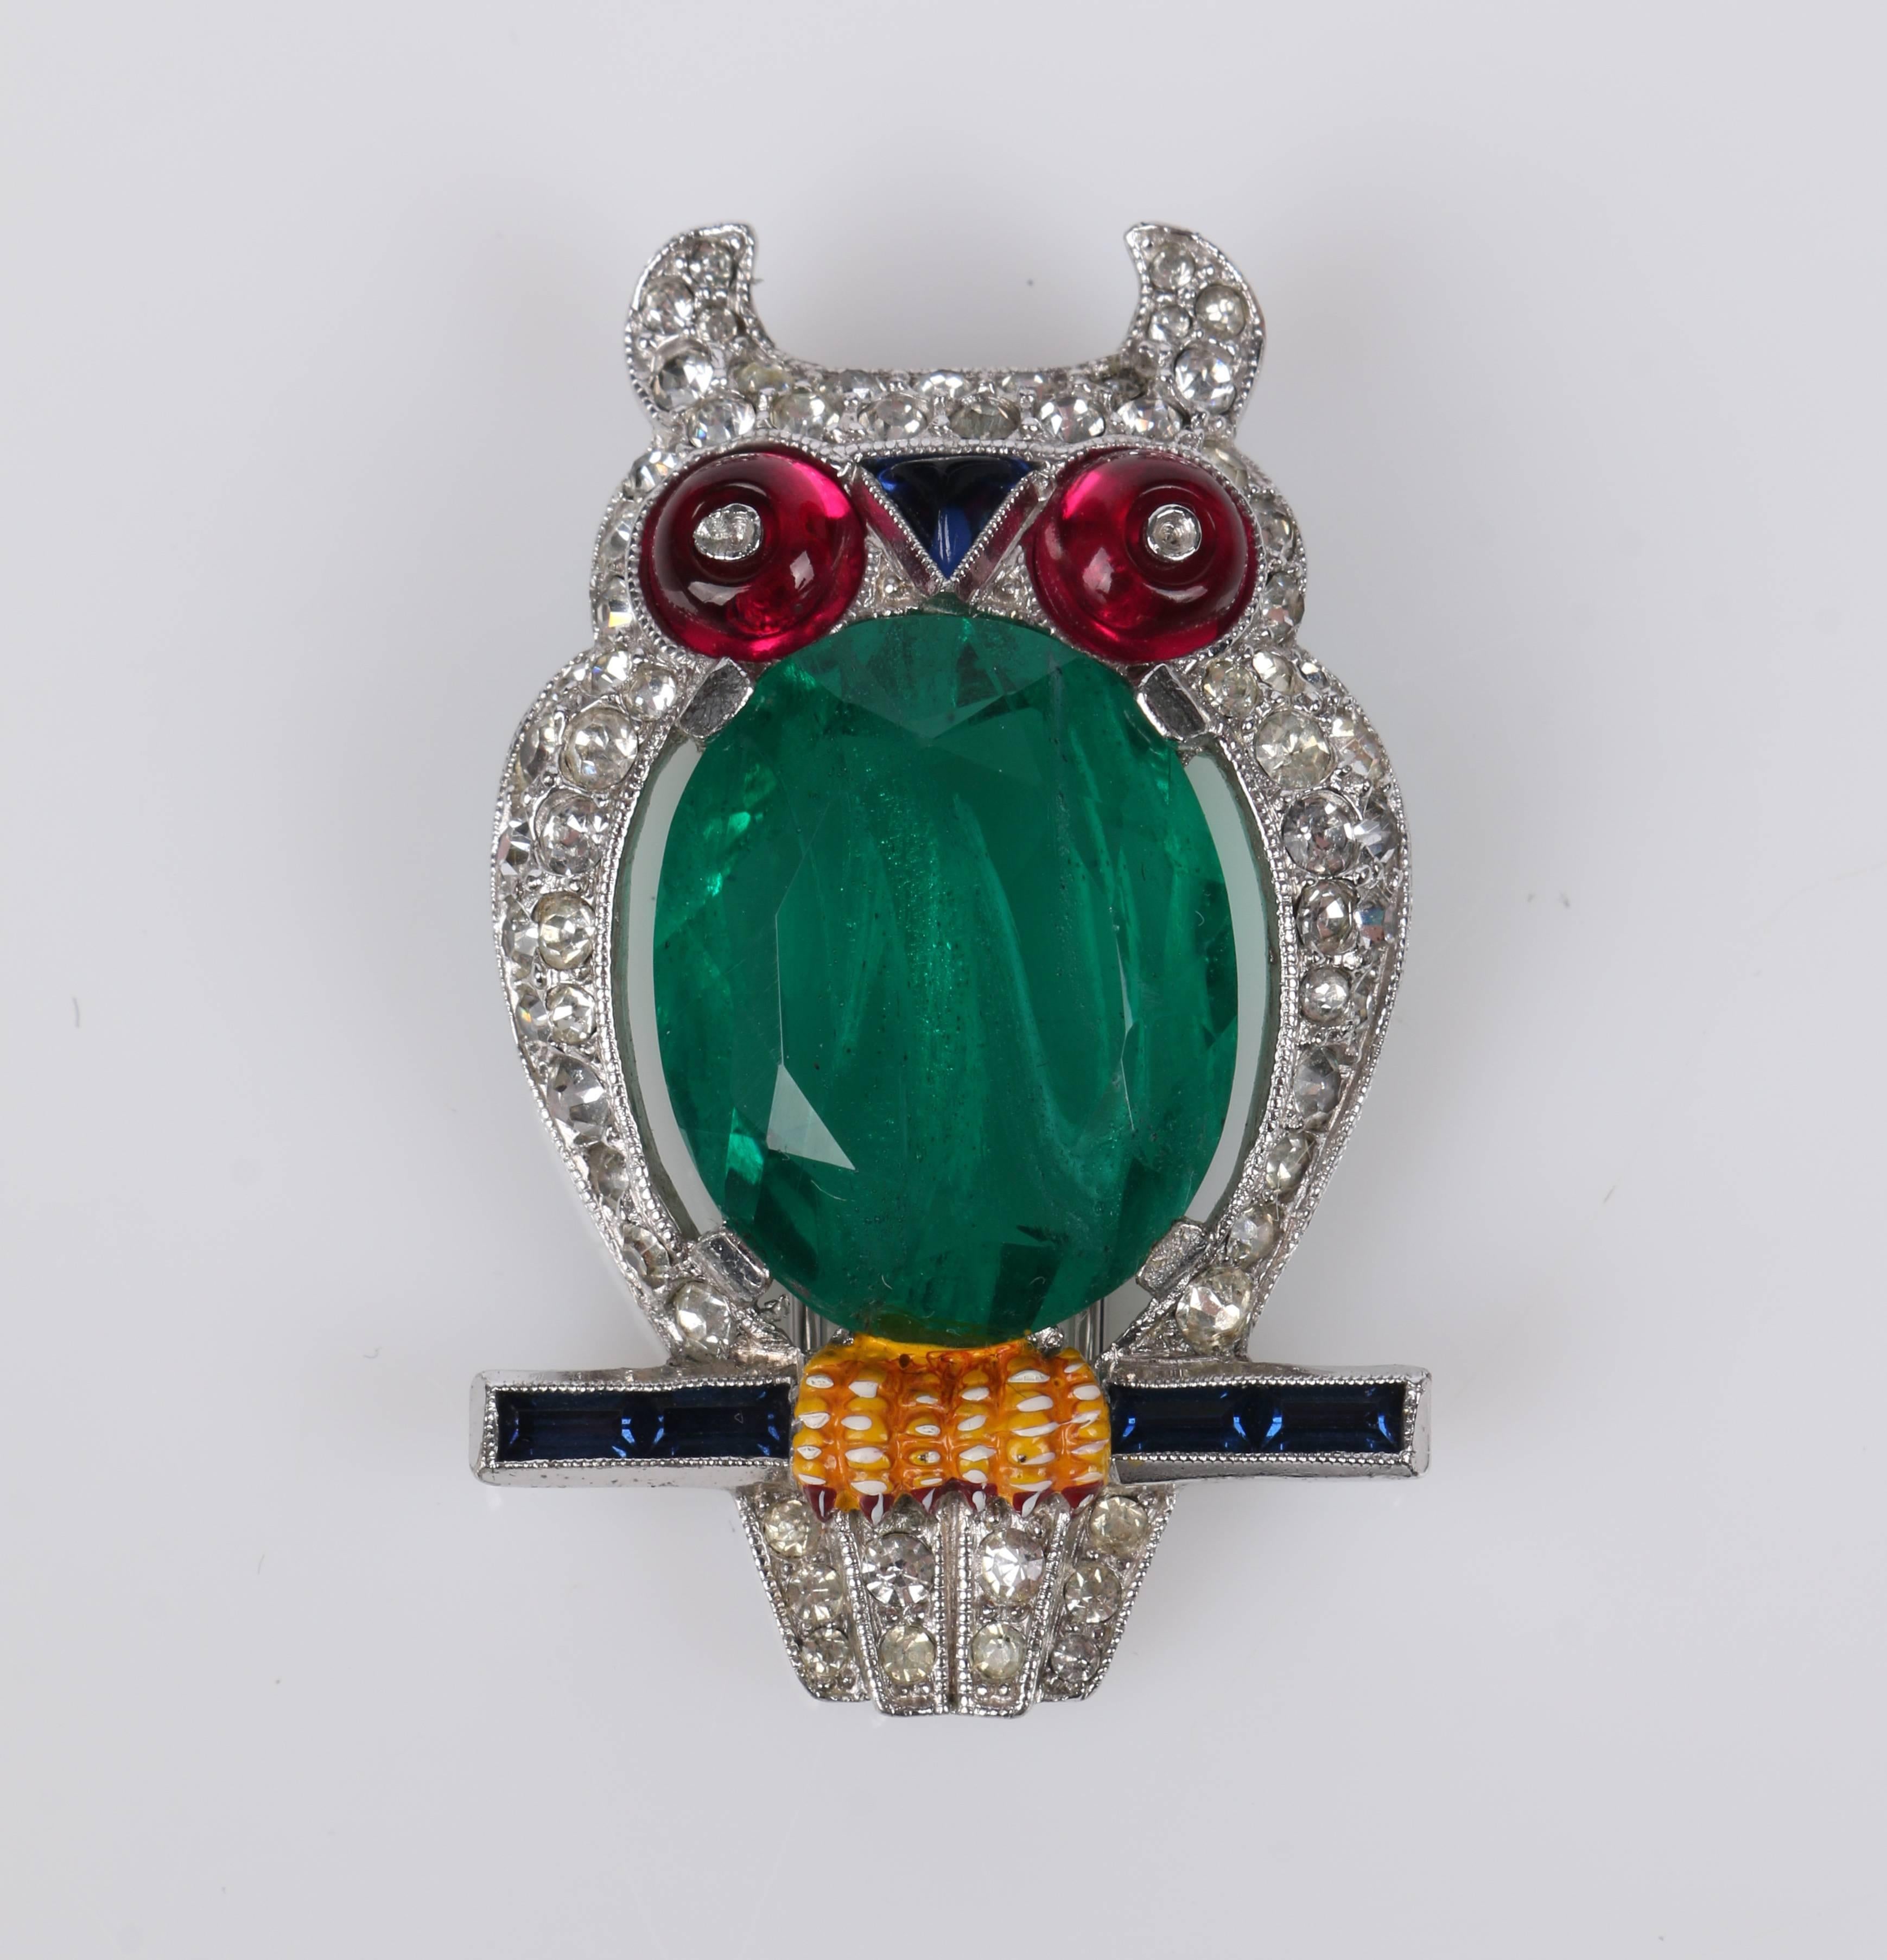 Vintage 1940's Trifari owl pin/clip designed by A. Phillipe, patent dated February 11,1941, (Reference: Brunialti 2008, Vol 2 p.104).  Pin marked 